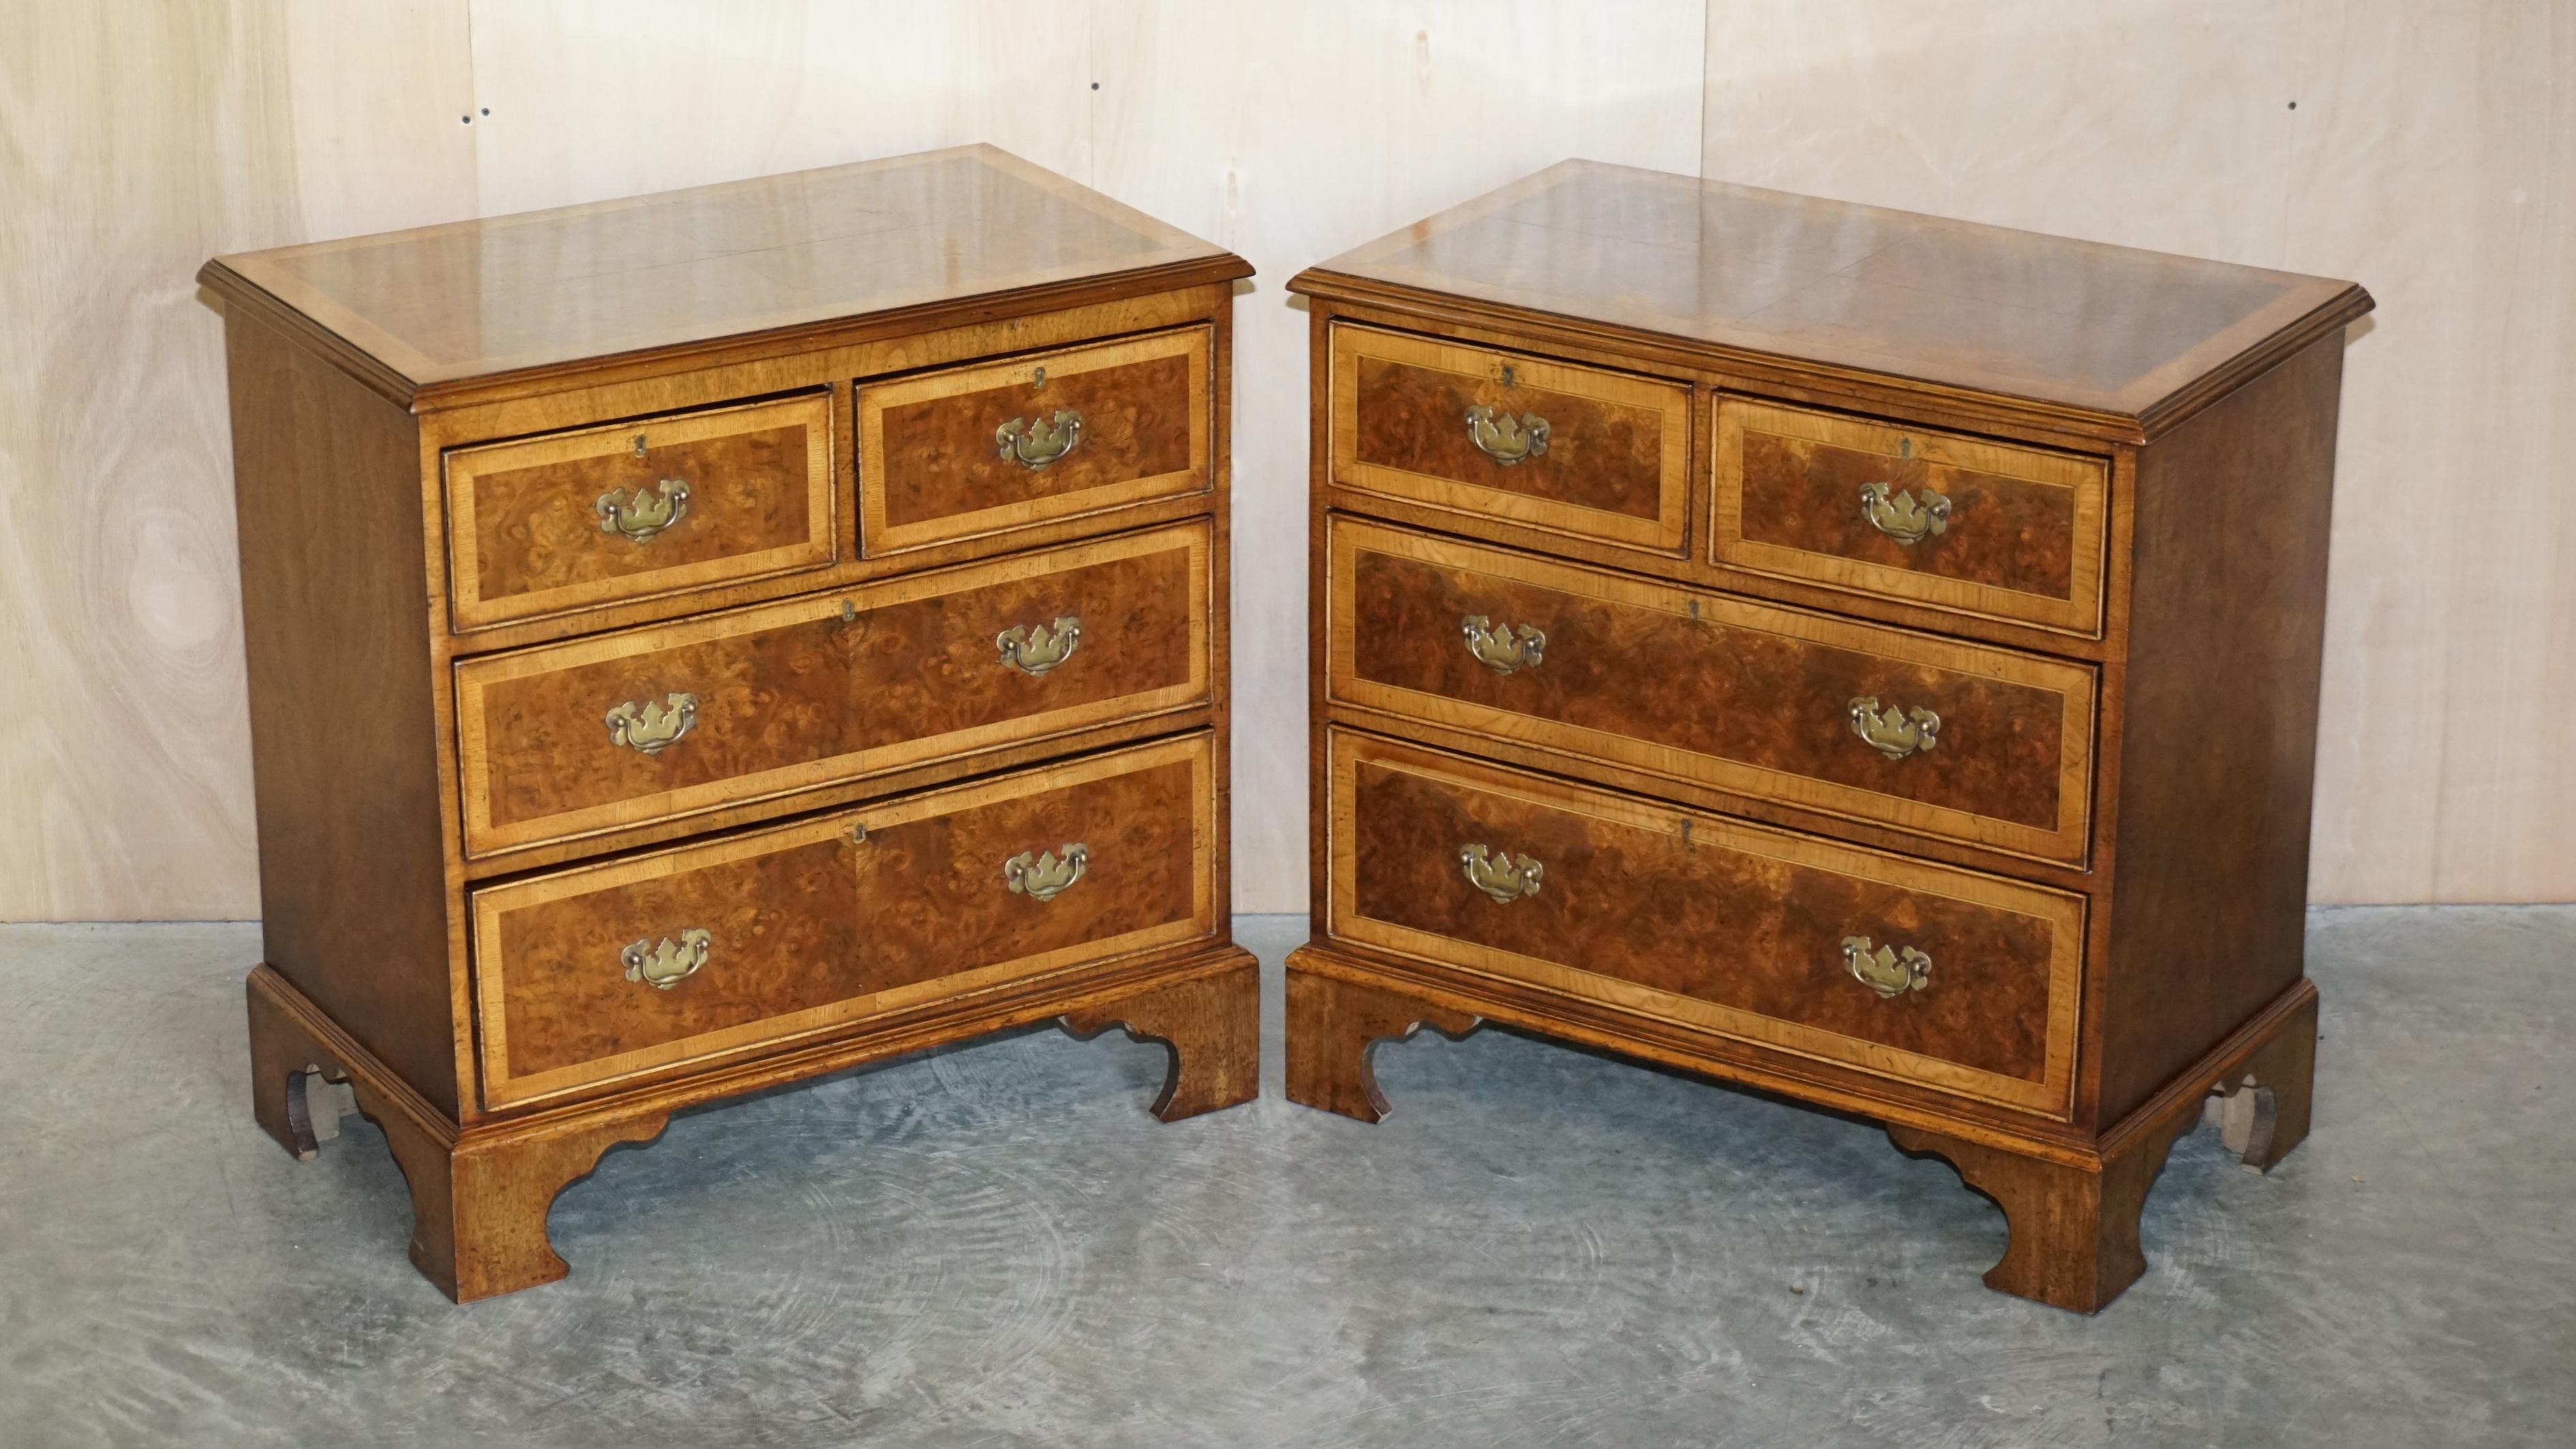 We are delighted to offer for sale this lovely pair of Georgian style circa 1900 hand made Burr Walnut chests of drawers

A very good looking and well made pair, they have a glorious timber patina, the burr walnut panels are framed with boxwood